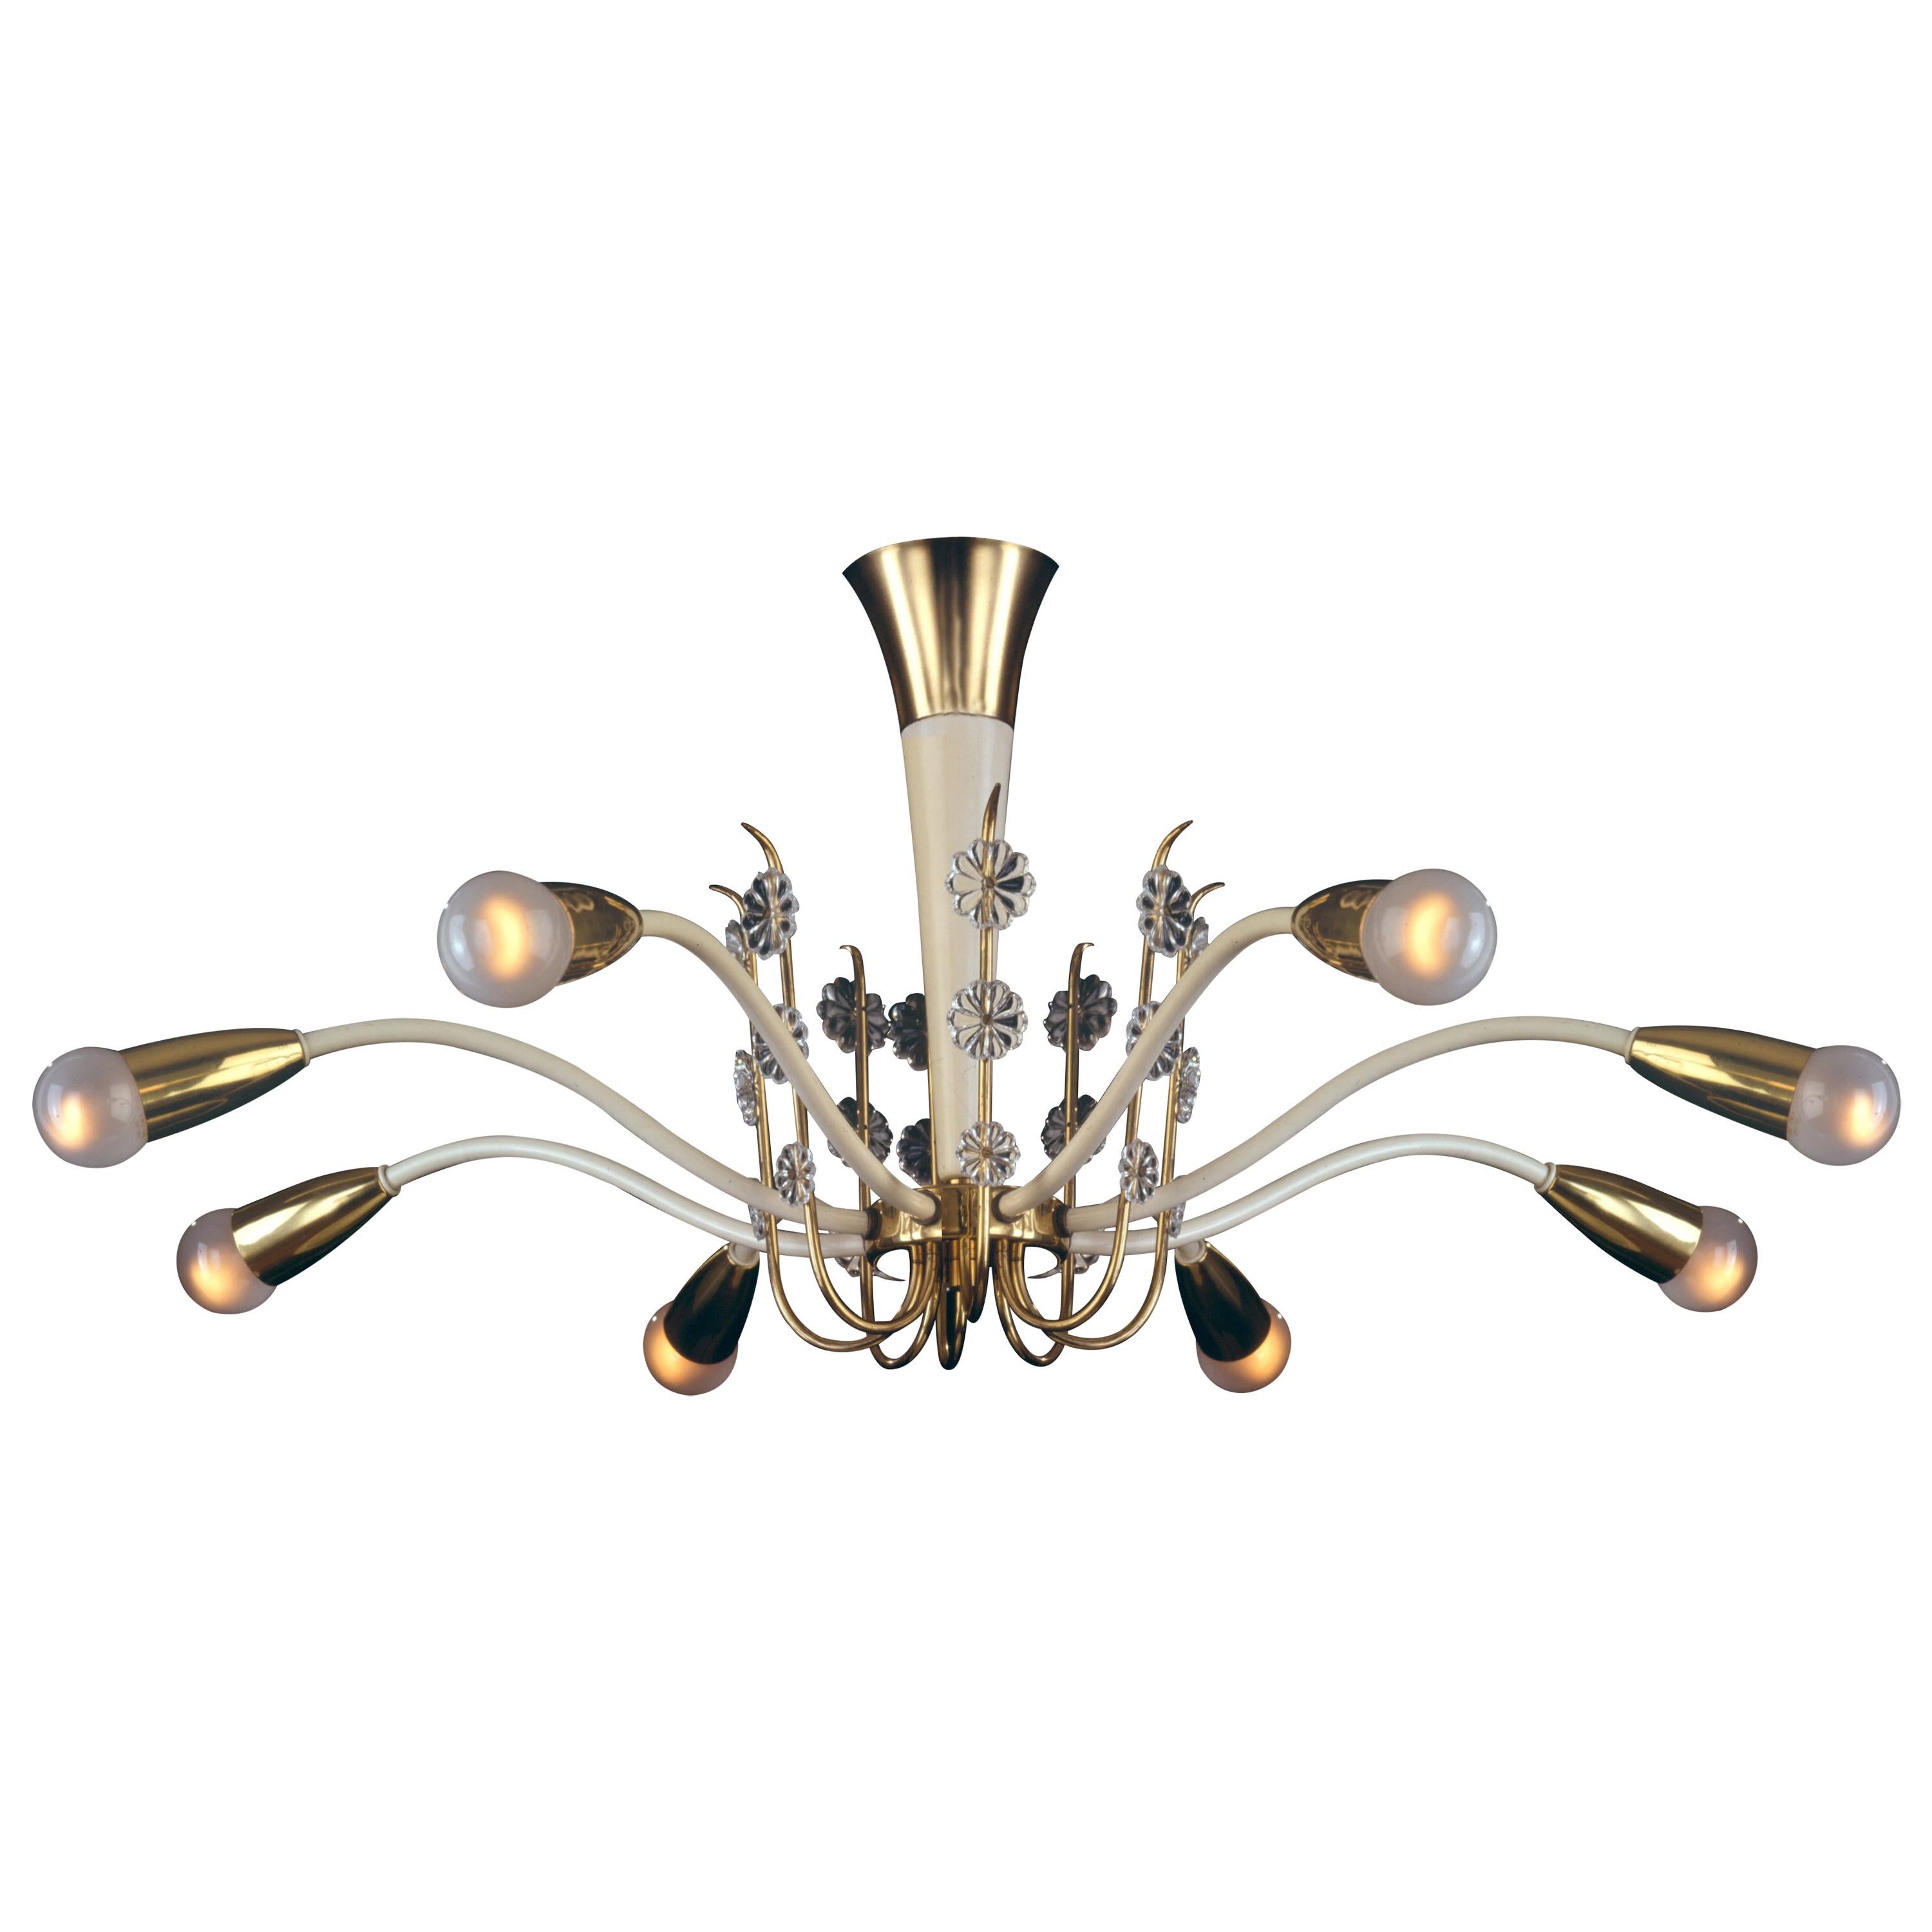 Mid-Century Modern "Princess" Chandelier, Variations Available, Re-Edition